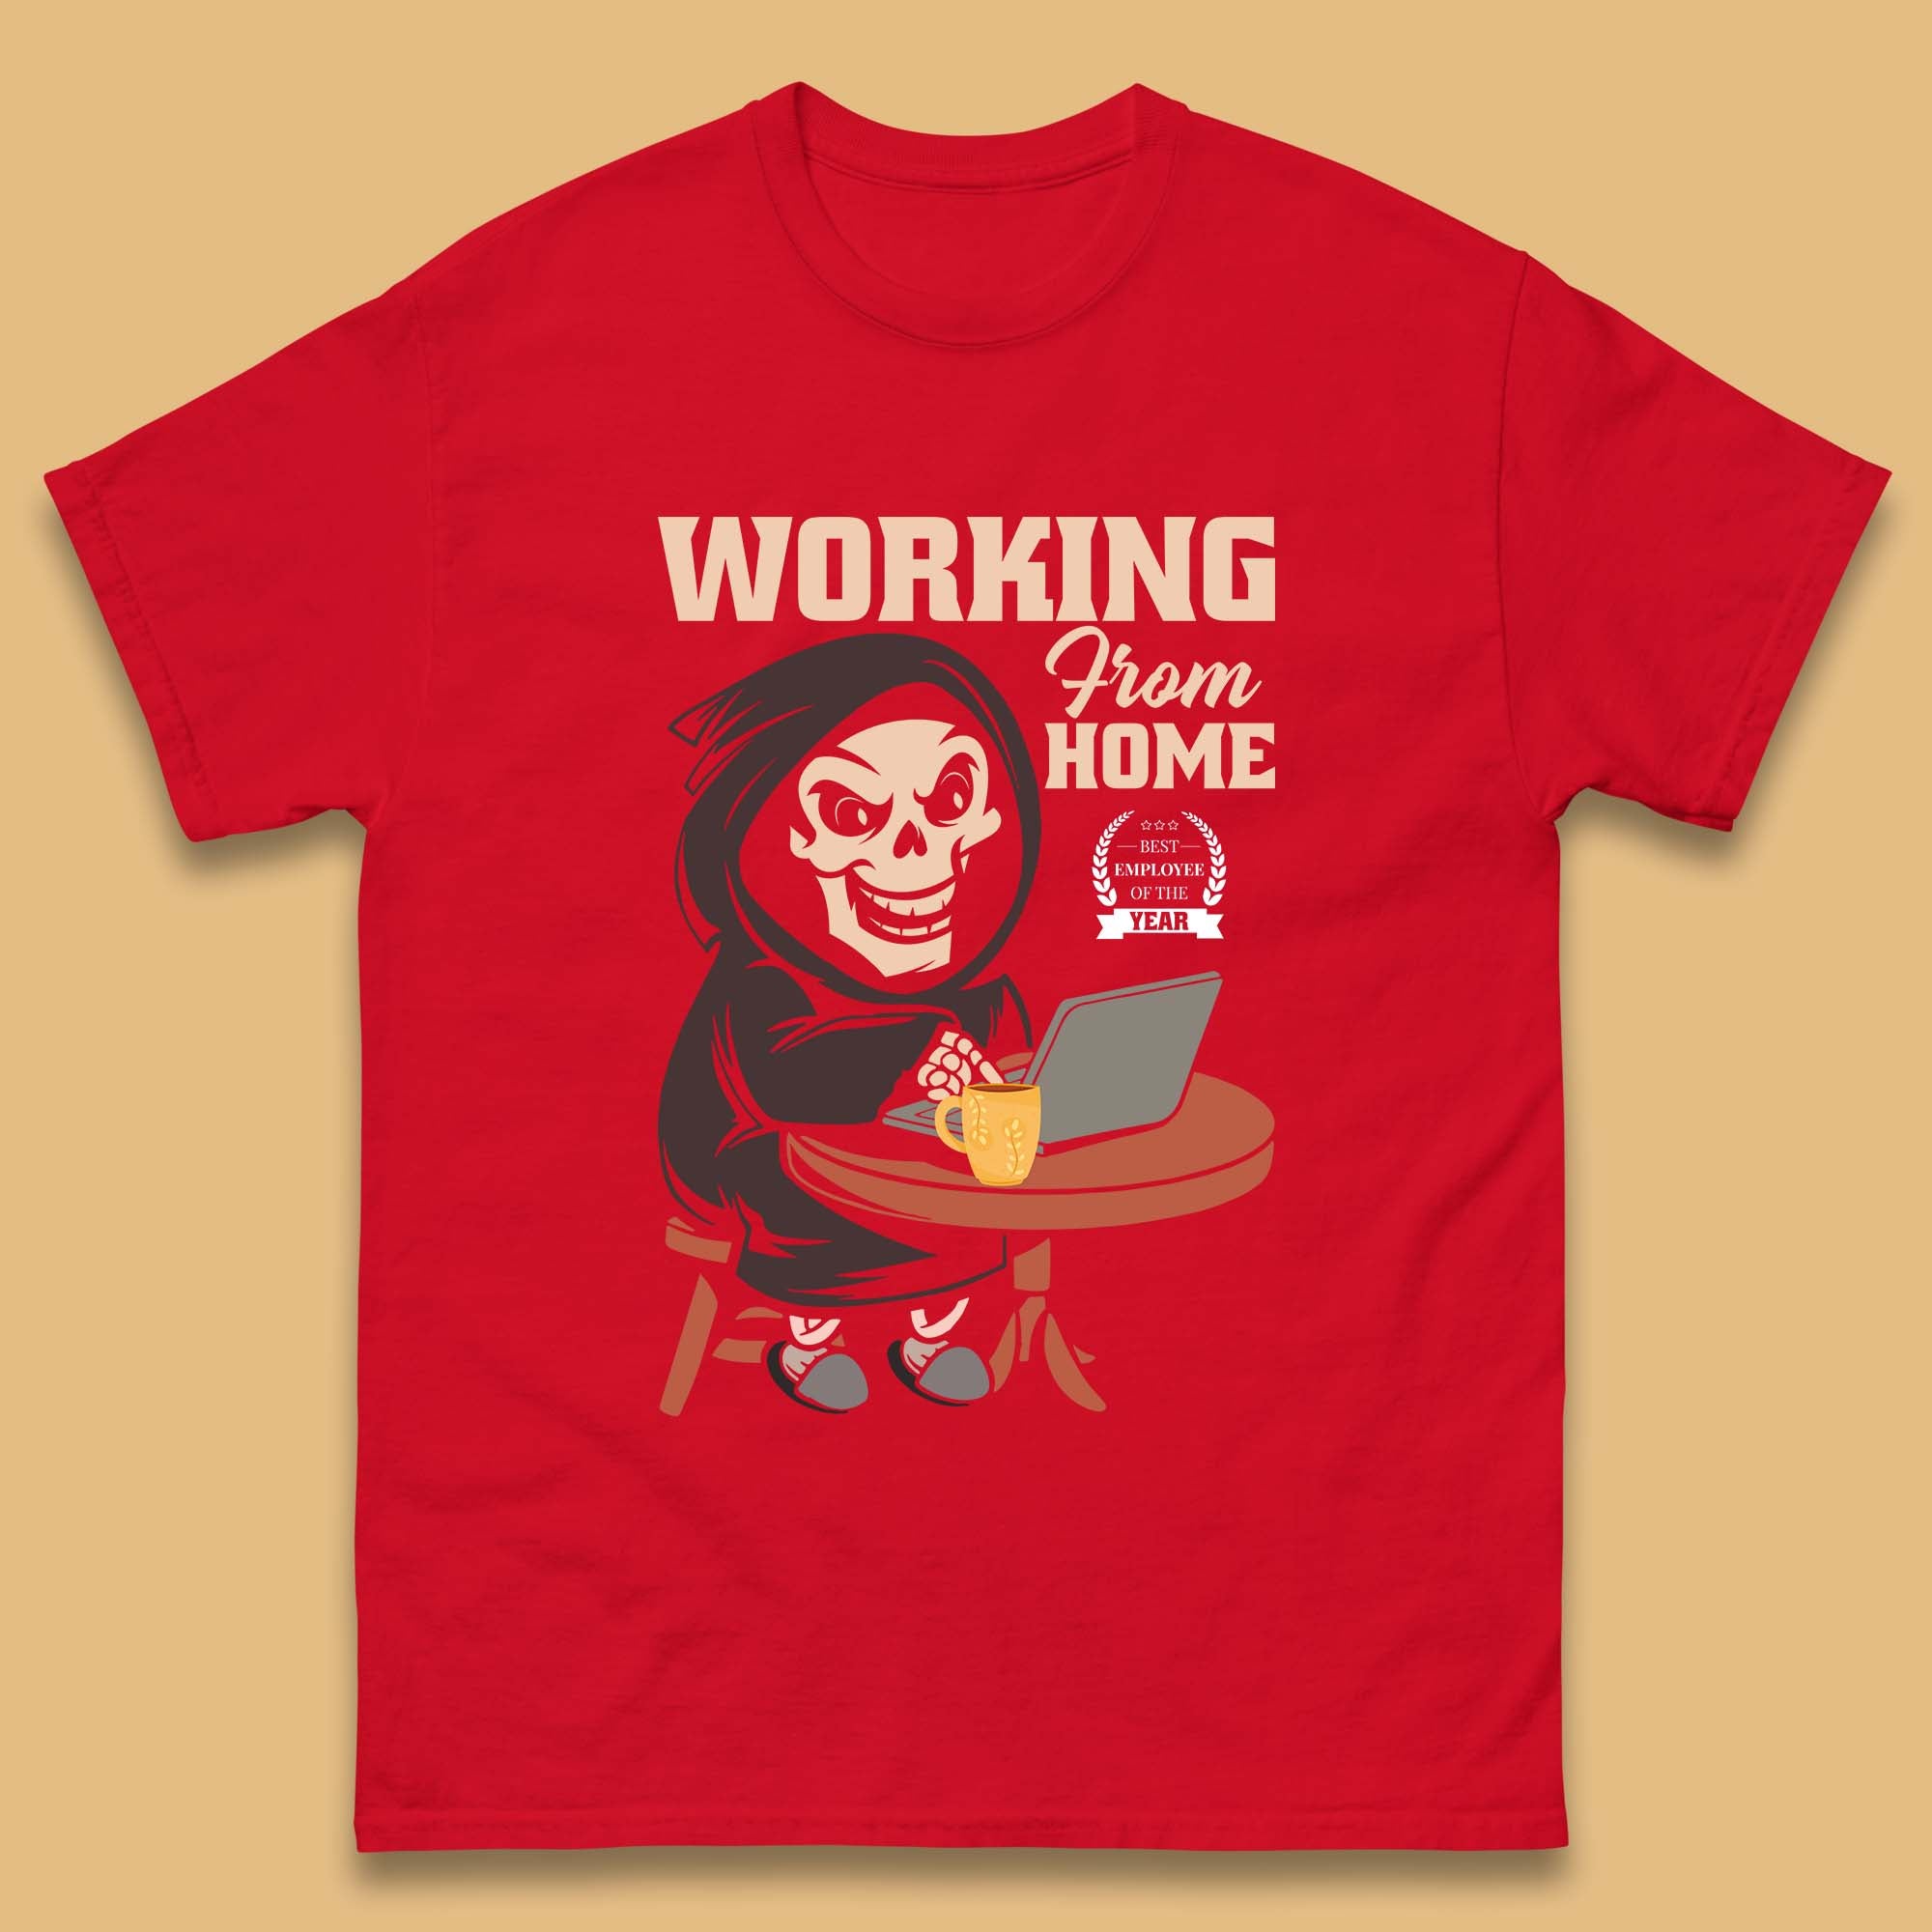 Employee of The Year T Shirt